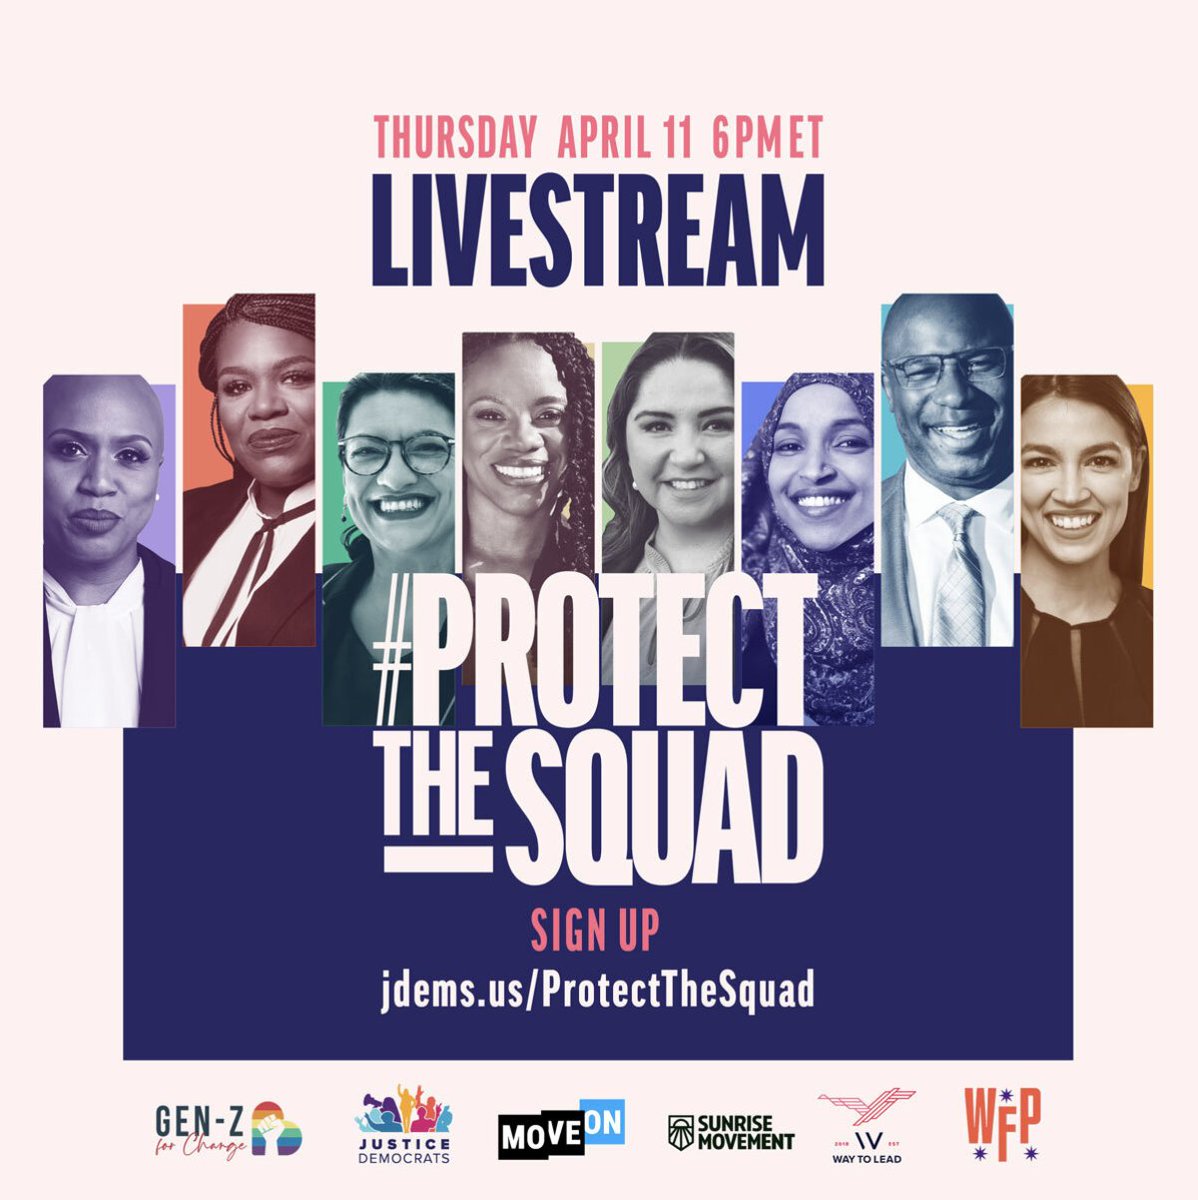 We are kicking off our digital efforts to Protect the Squad TOMORROW! Join me and my fellow Squad members with @genzforchange, @MoveOn, @waytoleadus, @sunrisemvmt, @WorkingFamilies & @justicedems to learn how we'll defend our people power in Congress.👊🏿 jdems.us/ProtectTheSquad